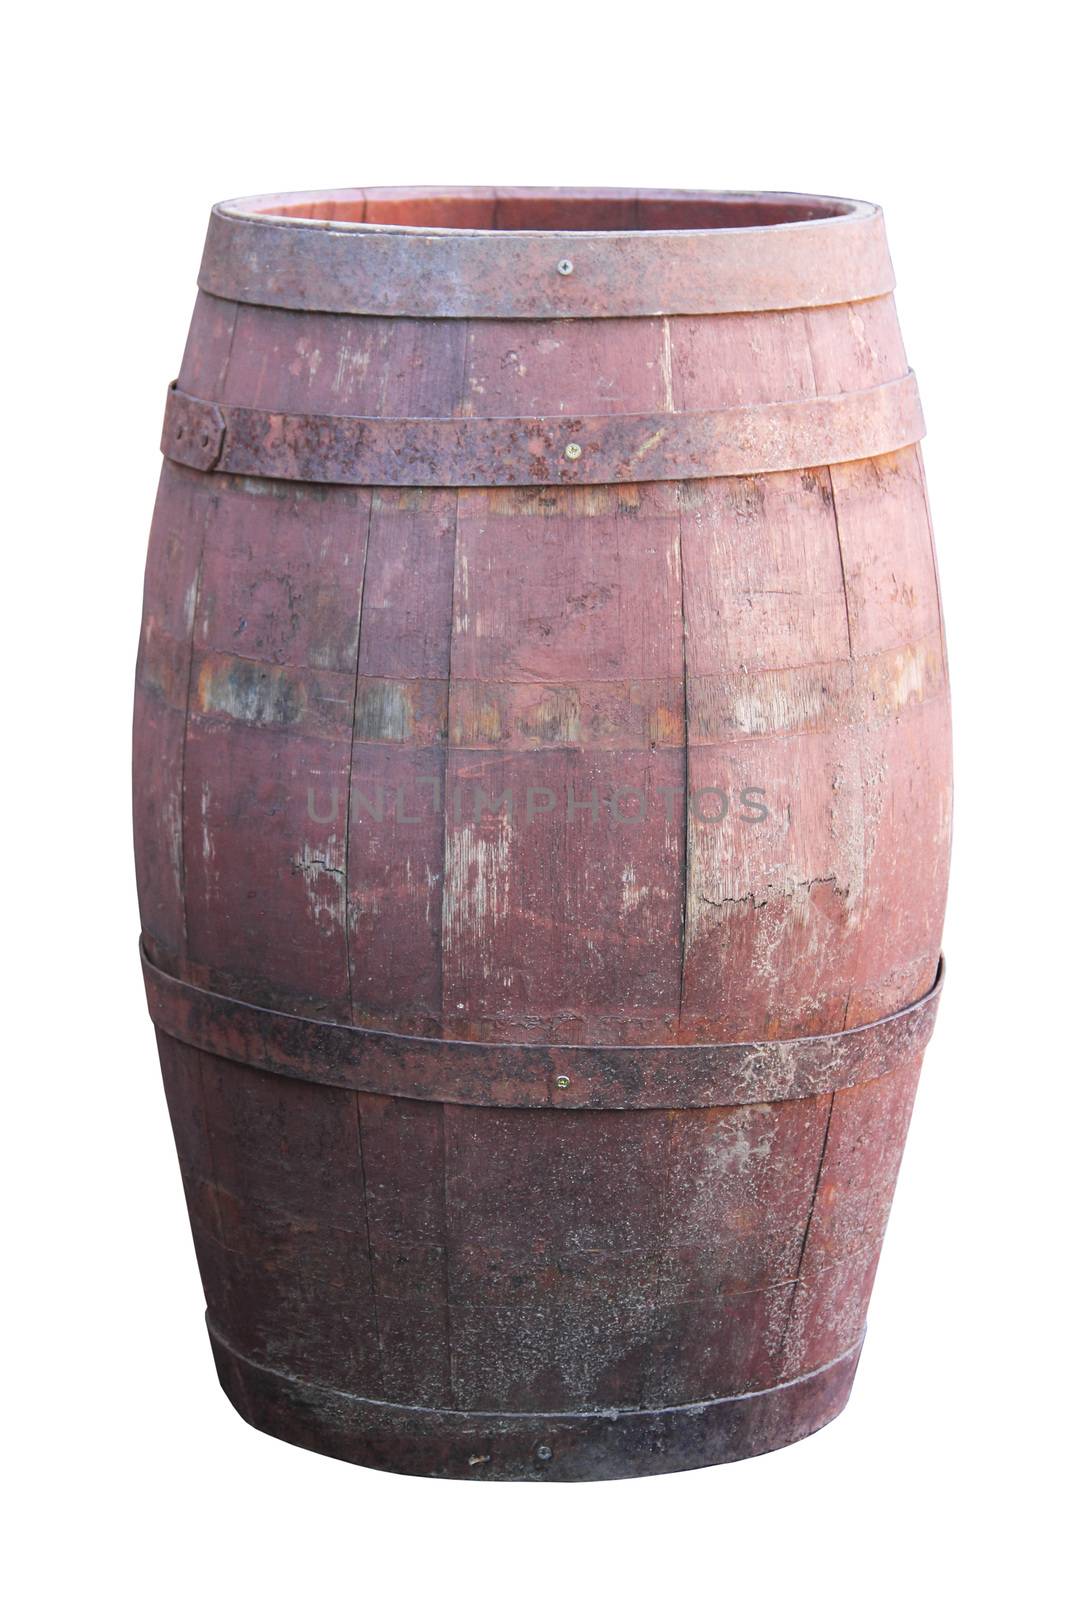 Old Barrel isolated on white by destillat